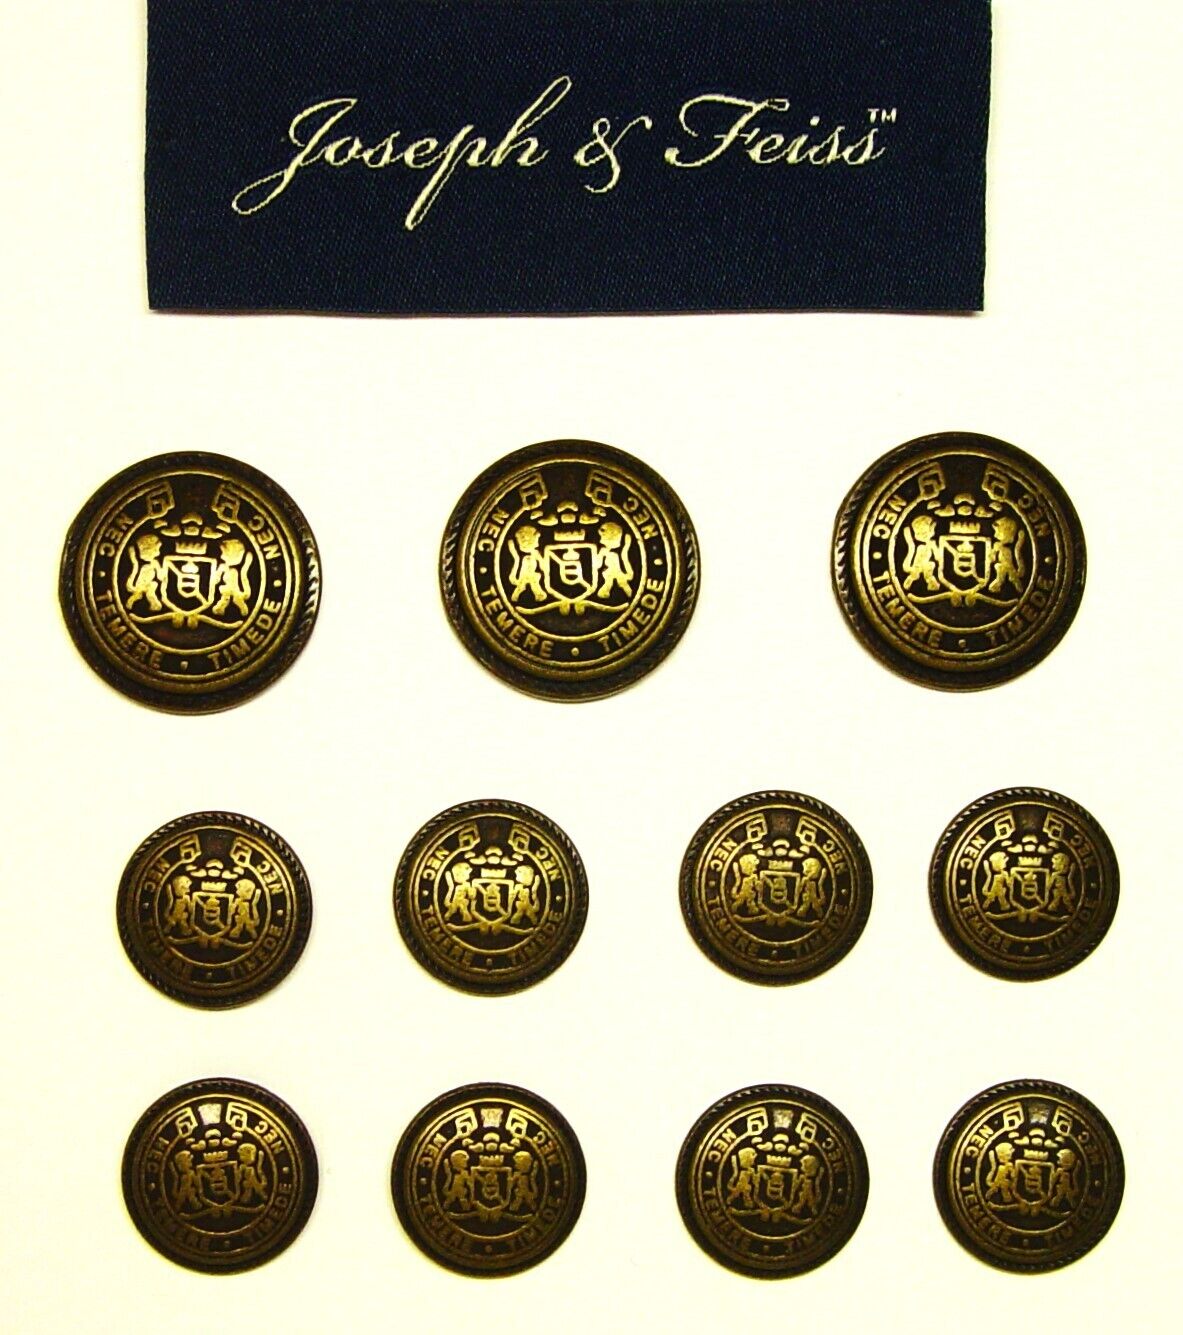 JOSEPH & FEISS replacement buttons 11 dark bronze metal, PRISTINE USED CONDITION